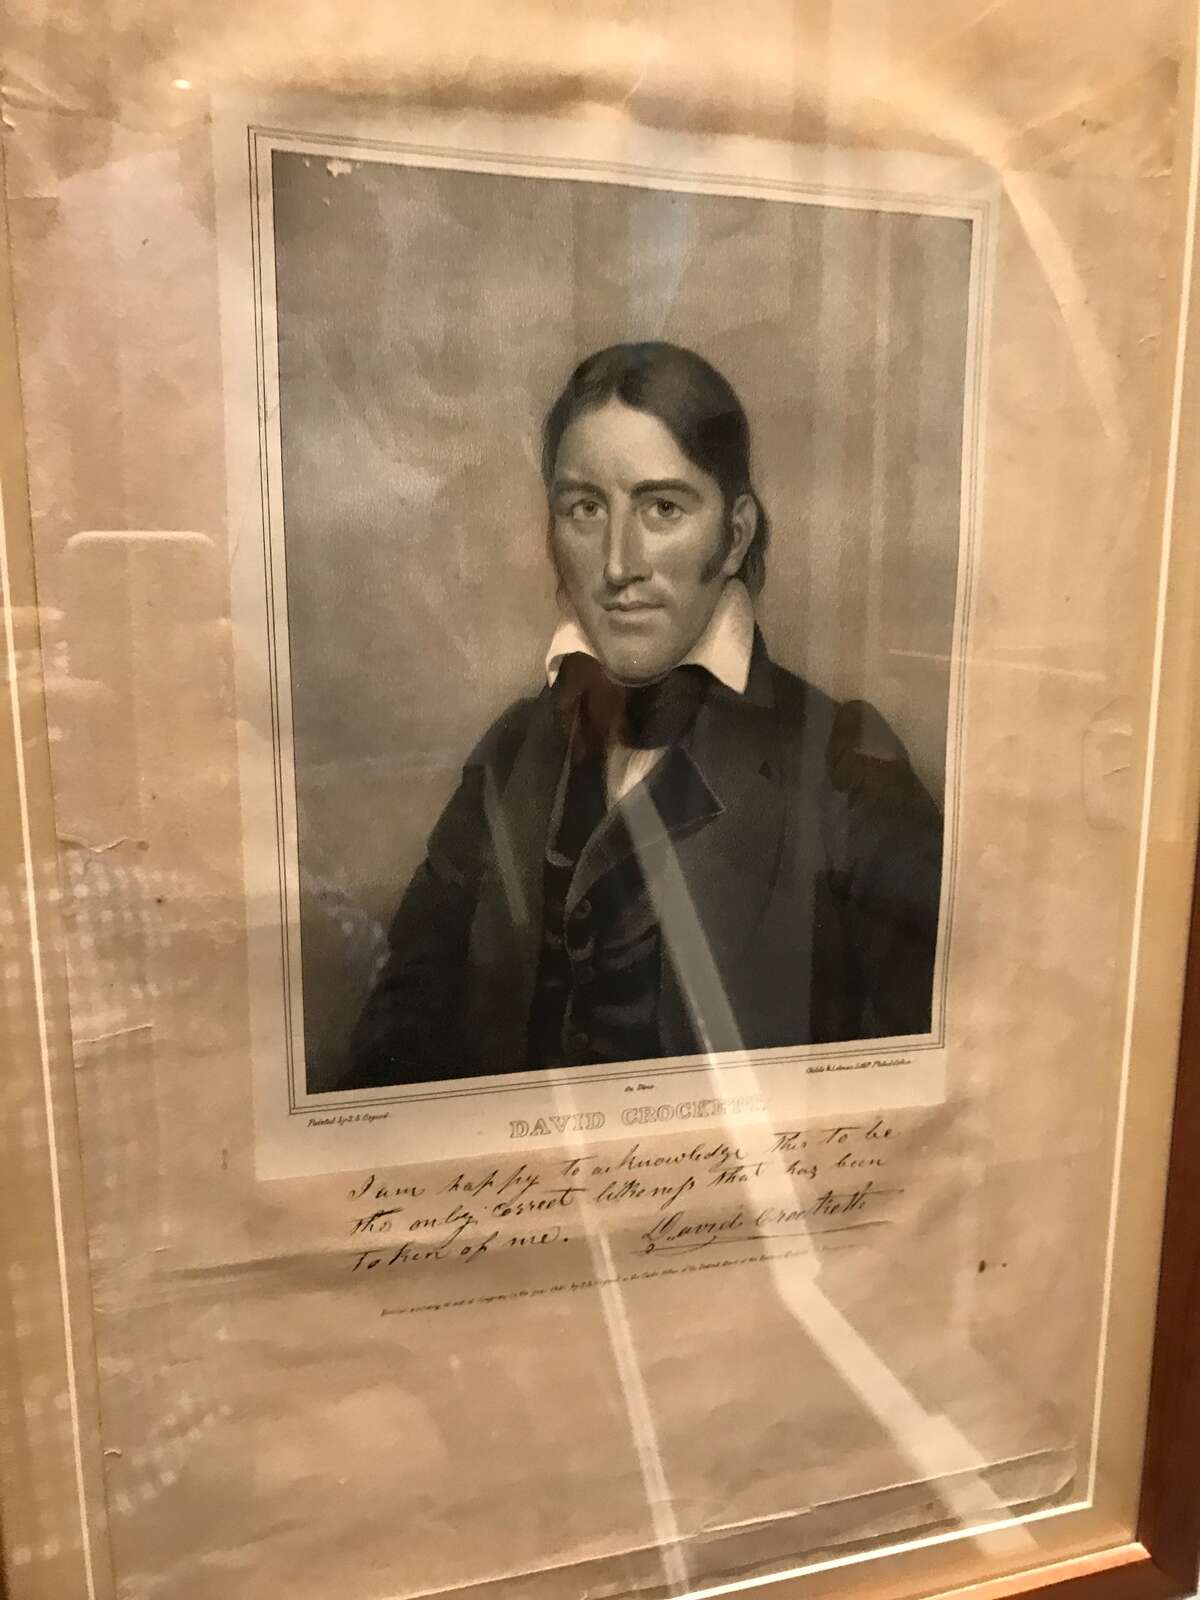 The caption reads: "I am happy to acknowledge this to be the only correct lithograph that has been taken of me." Signed, David Crockett